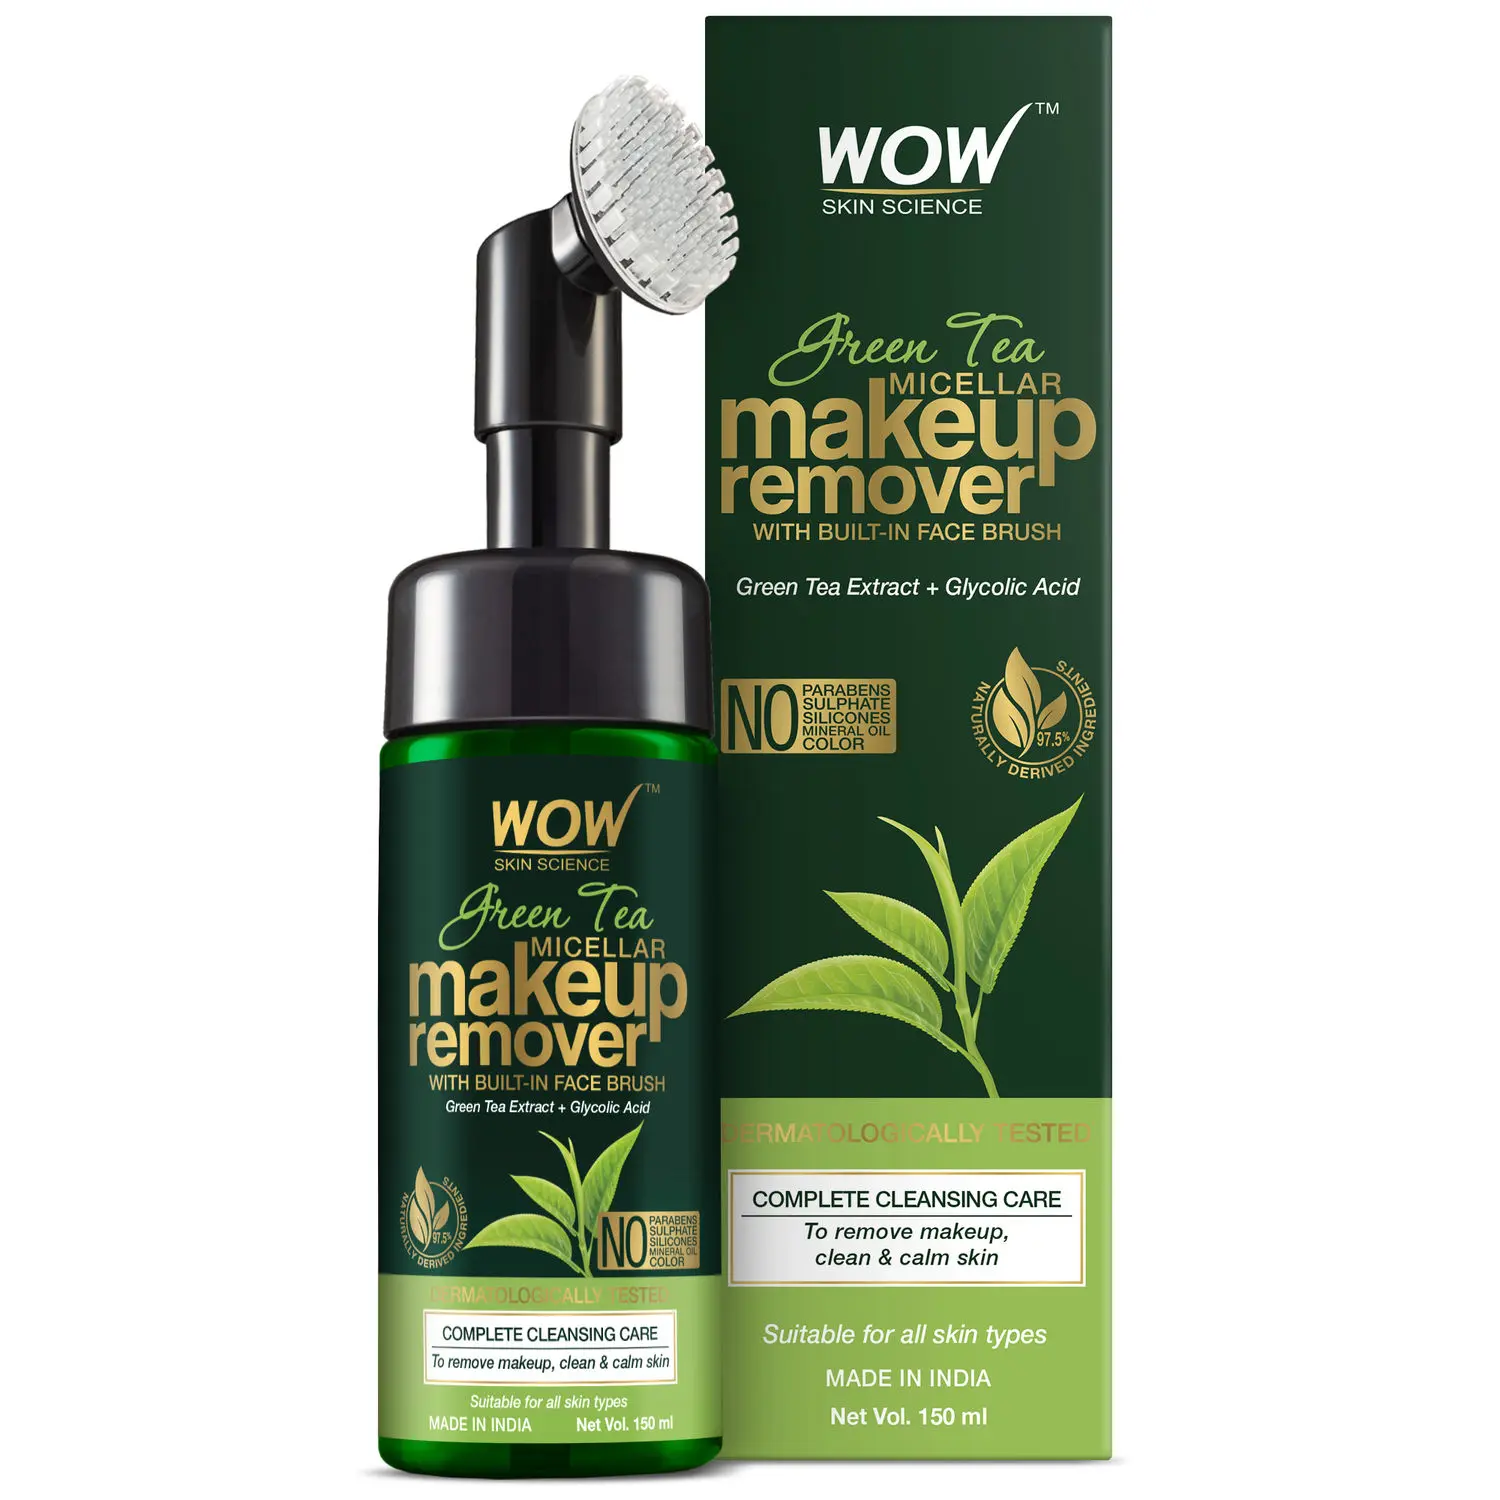 WOW Skin Science Green Tea Makeup Remover With Built-In Face Brush (MICELLAR) - No Parabens, Sulphate, Silicones, Mineral Oil, Color (150 ml)